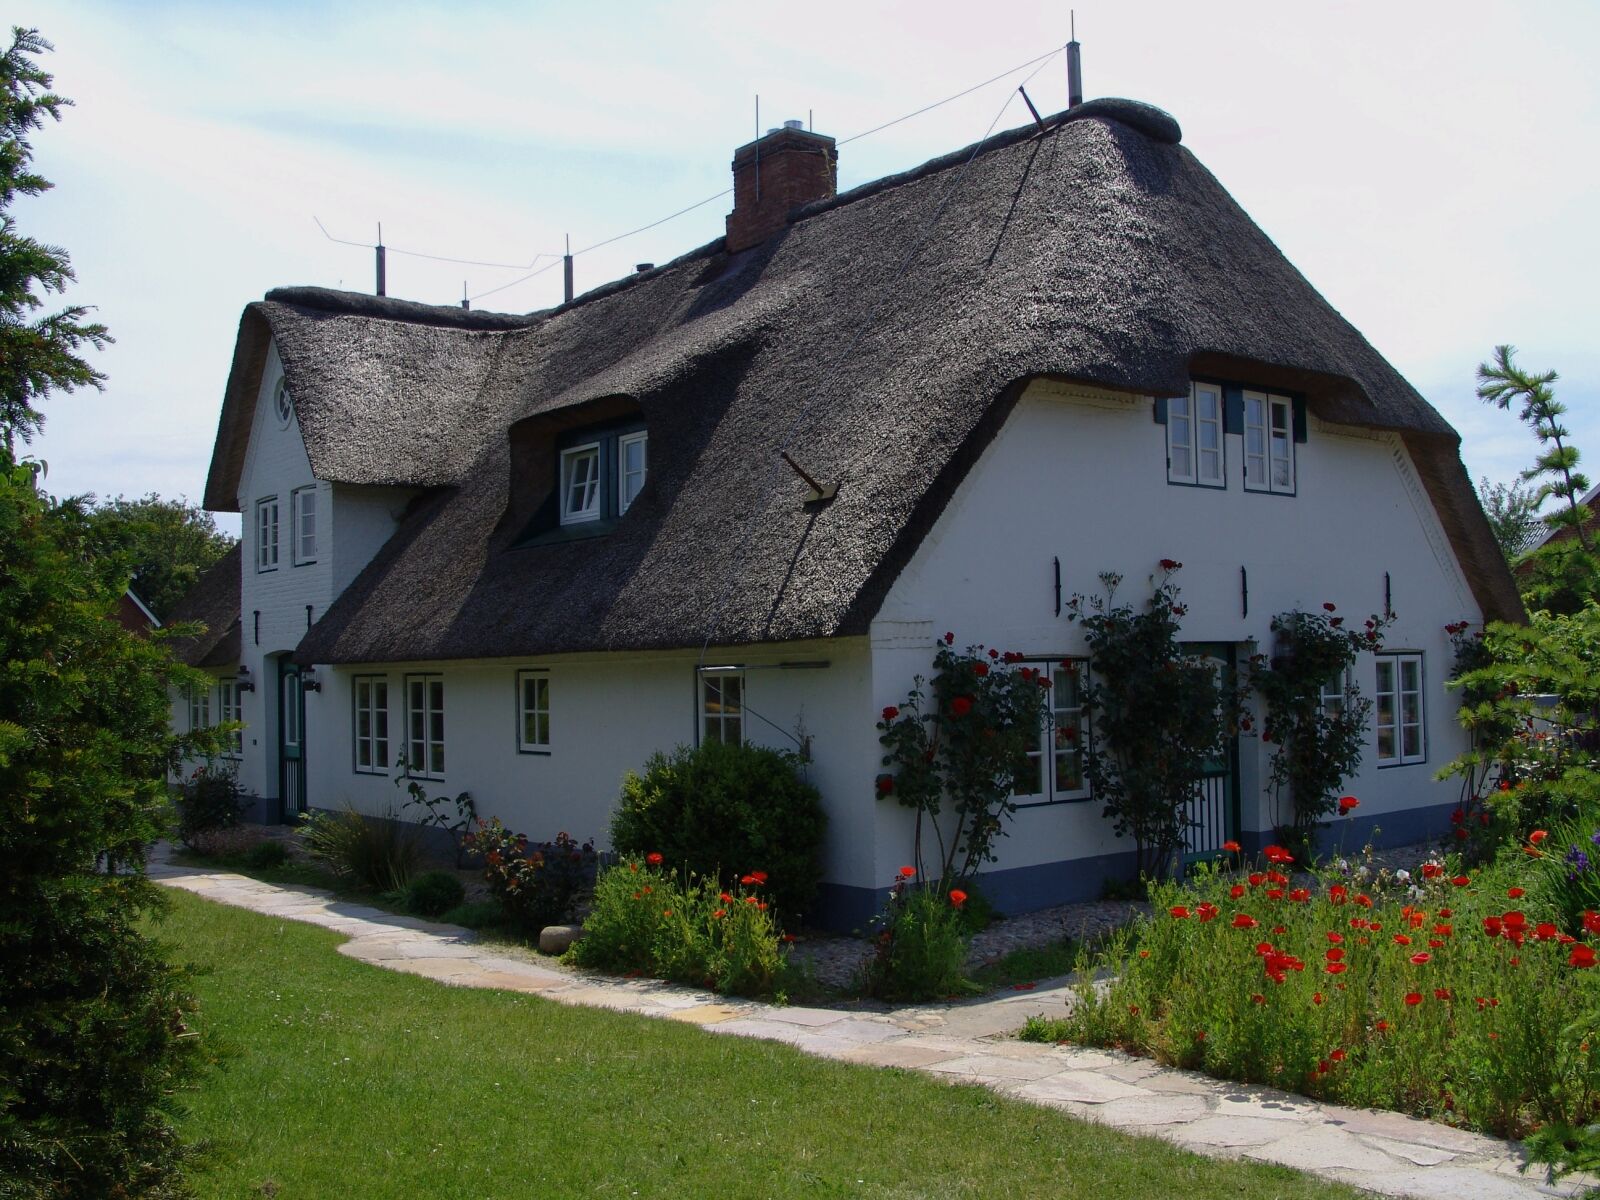 Sony DSC-F828 sample photo. Friesenhaus, thatched roof, f photography